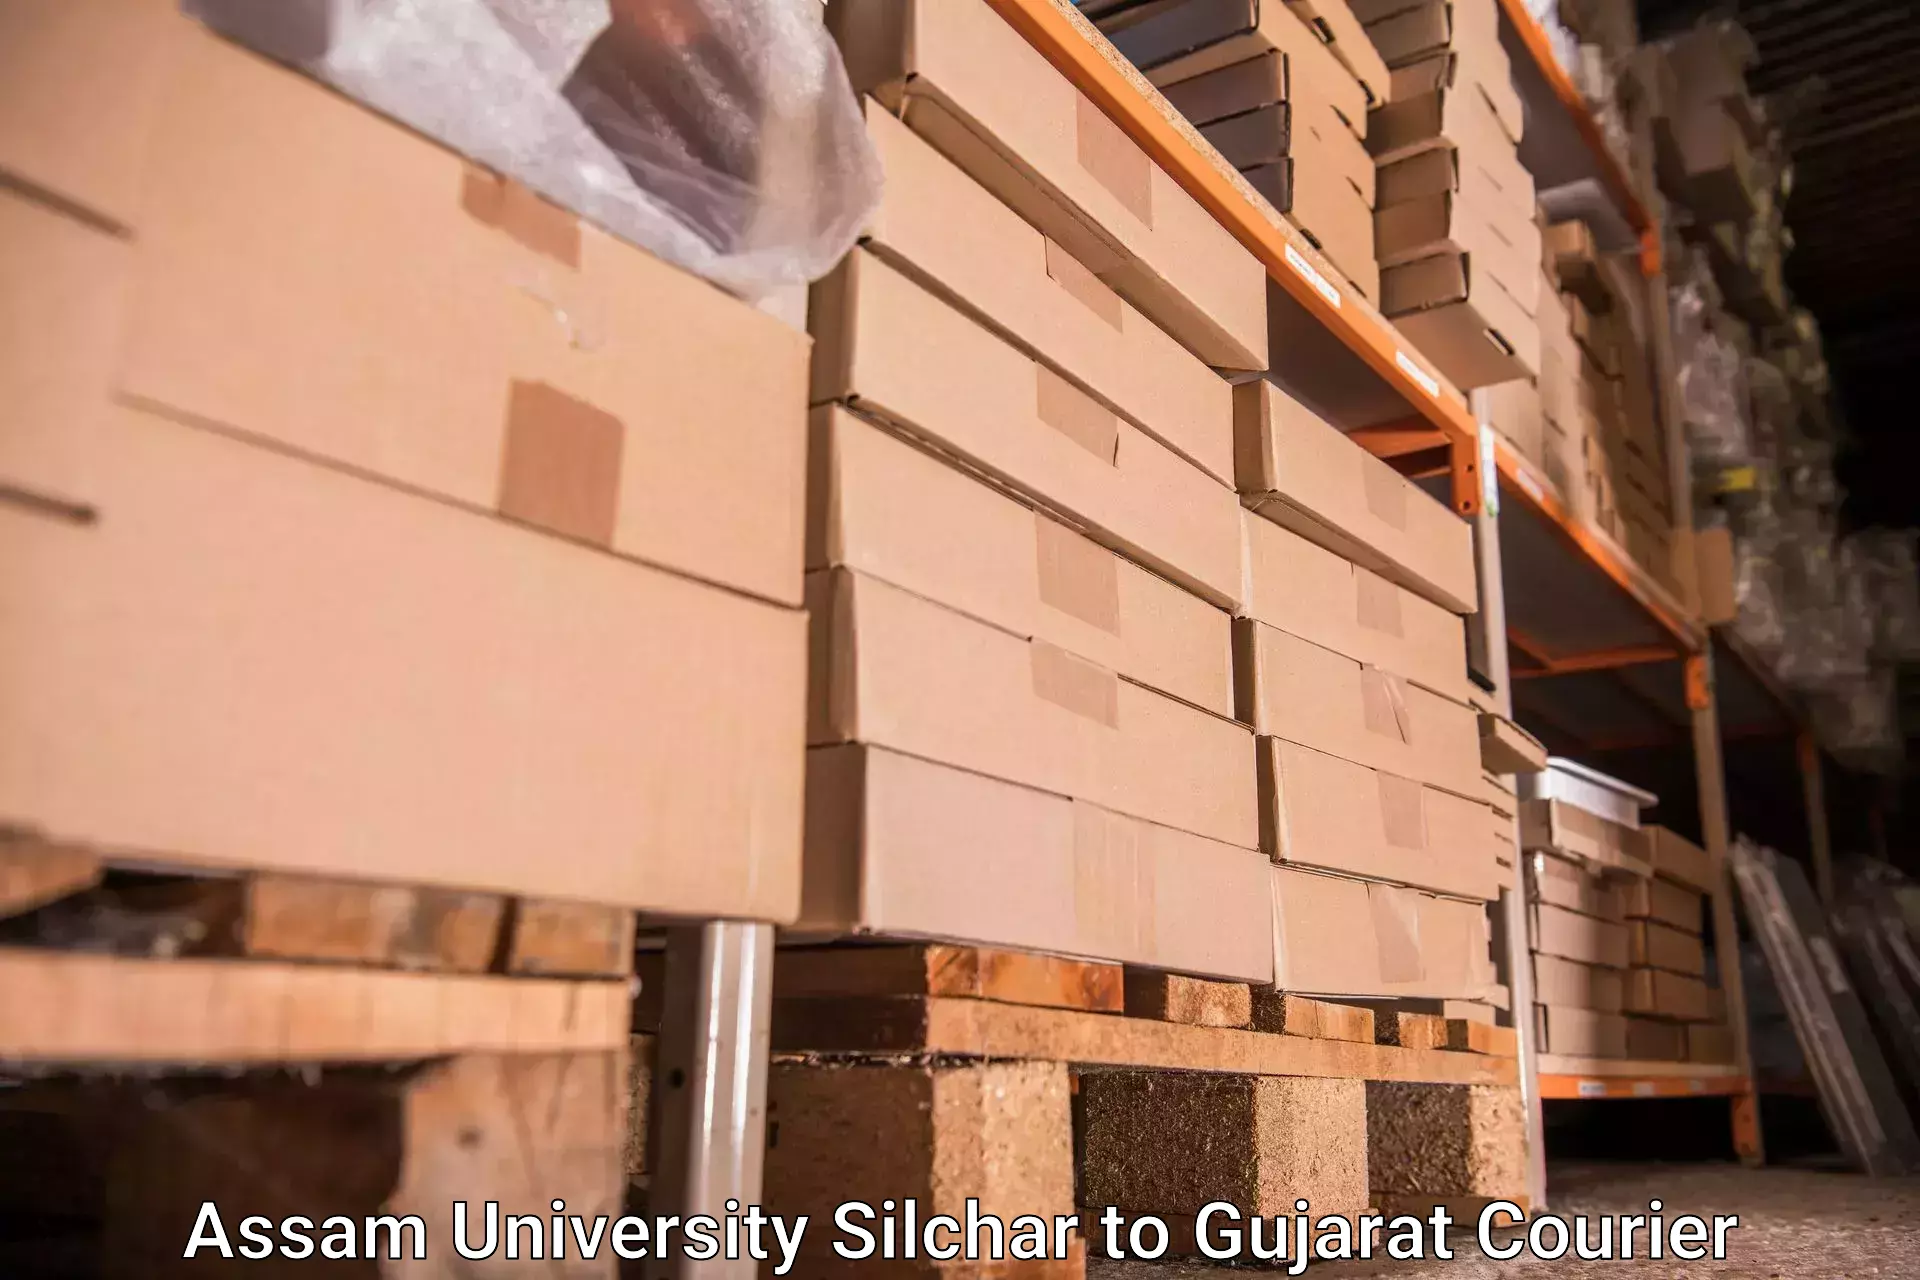 Baggage shipping experts Assam University Silchar to Godhra